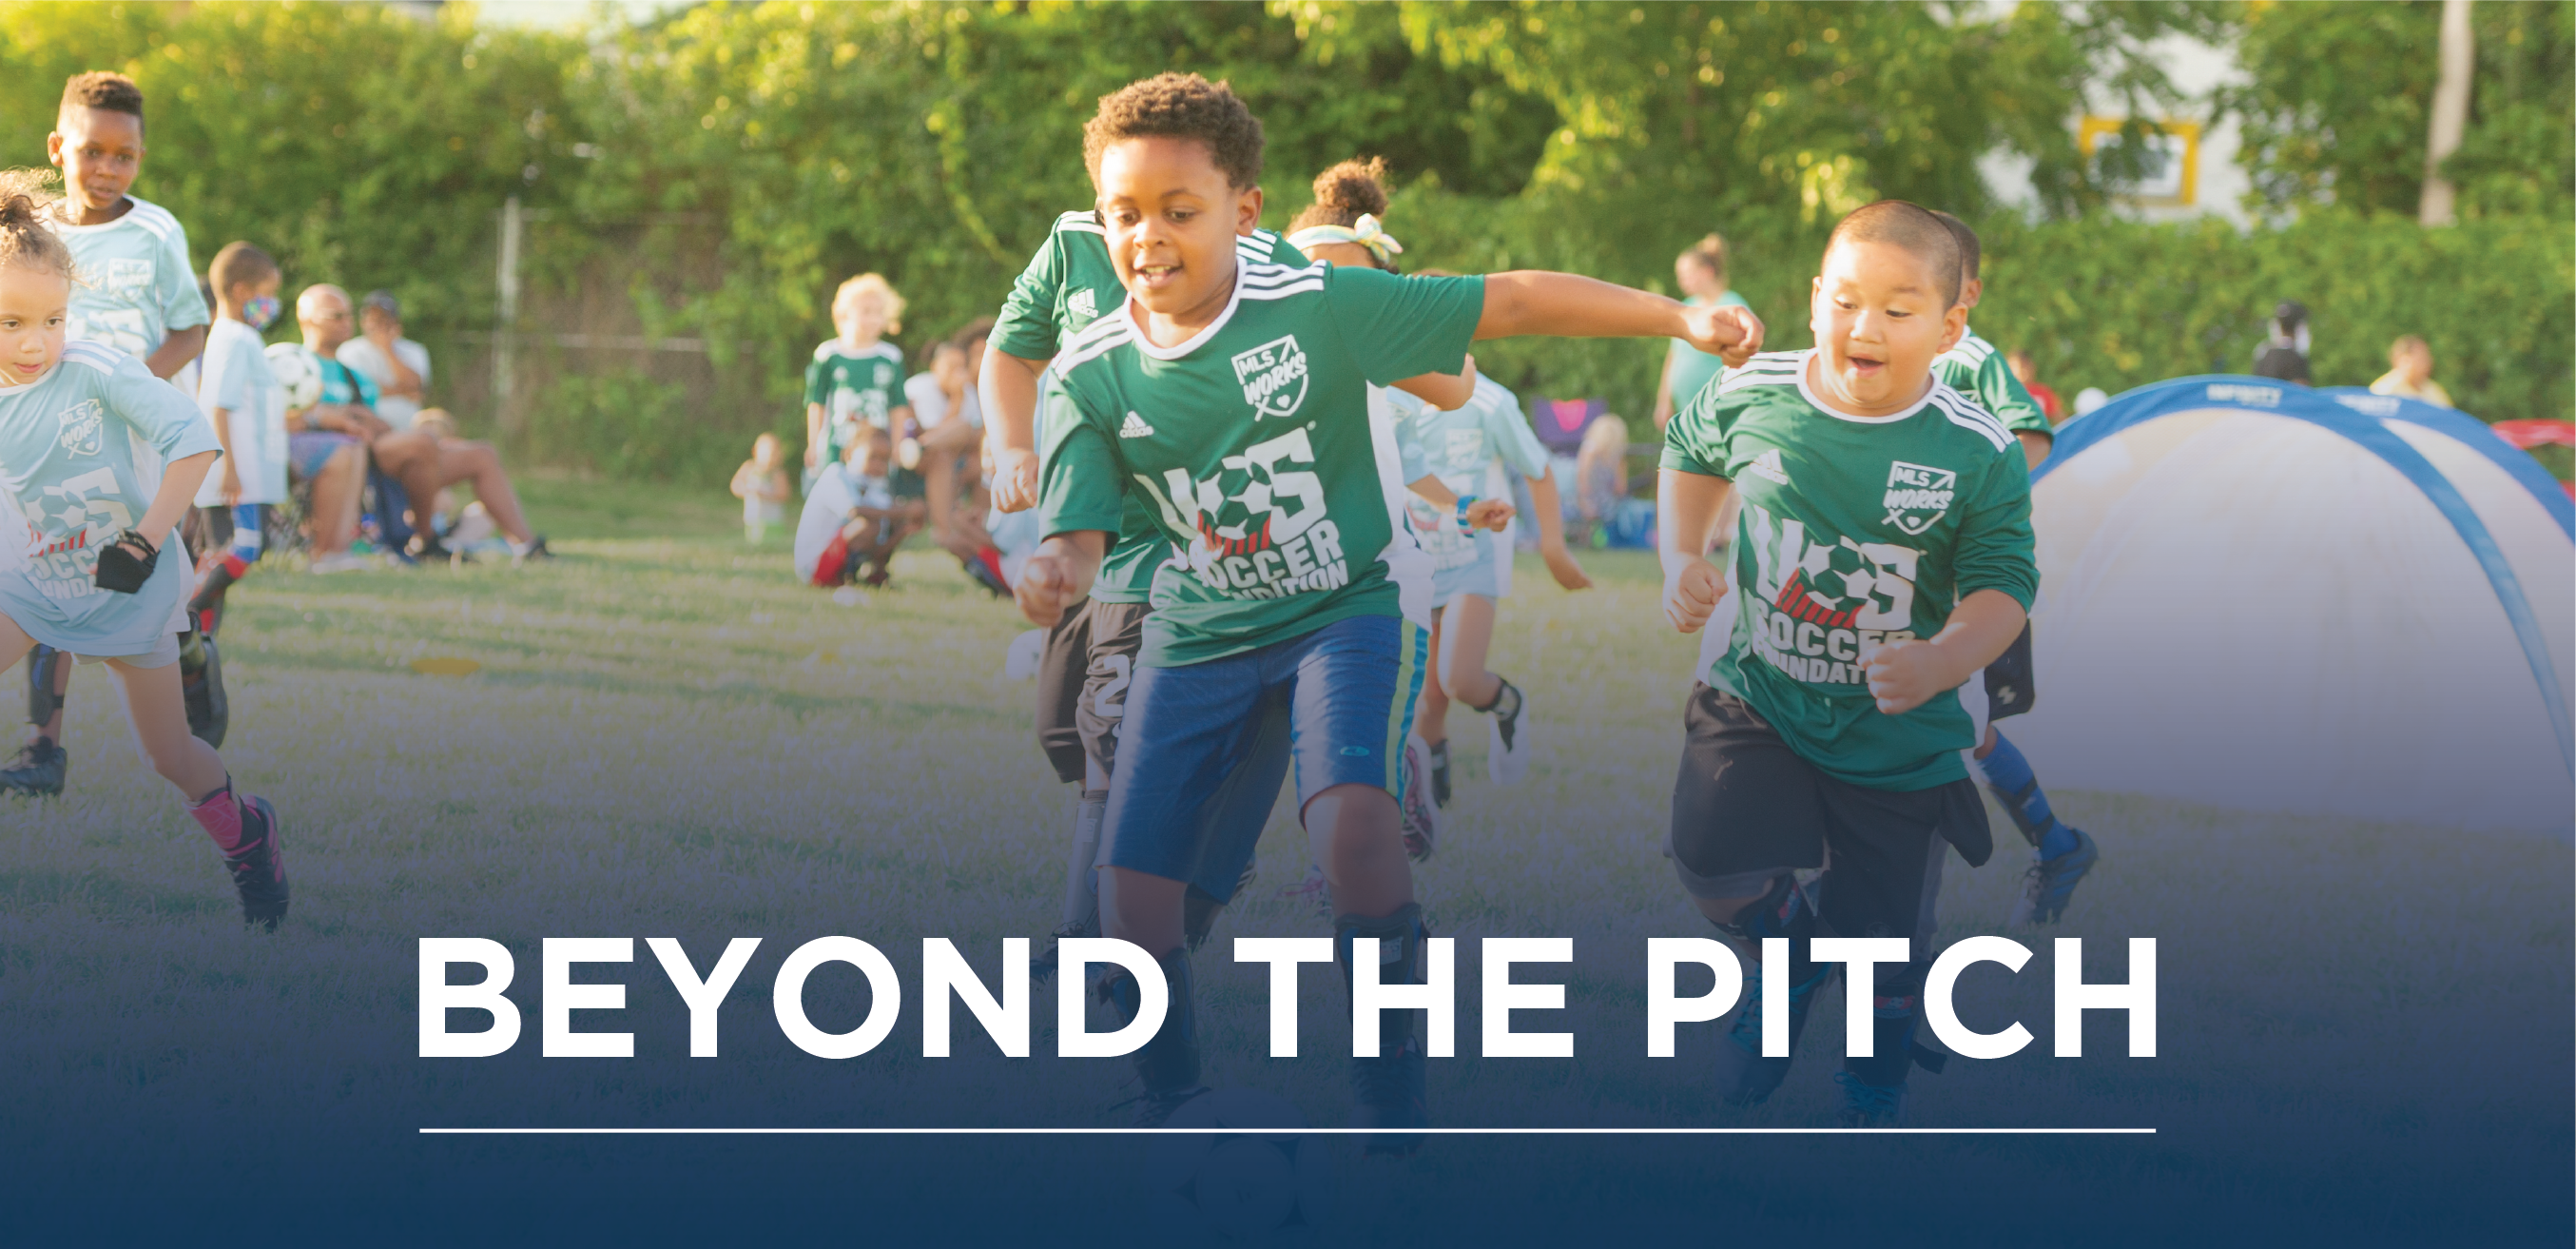 beyond the pitch newsletter hero image with children in green soccer jerseys running after soccer ball